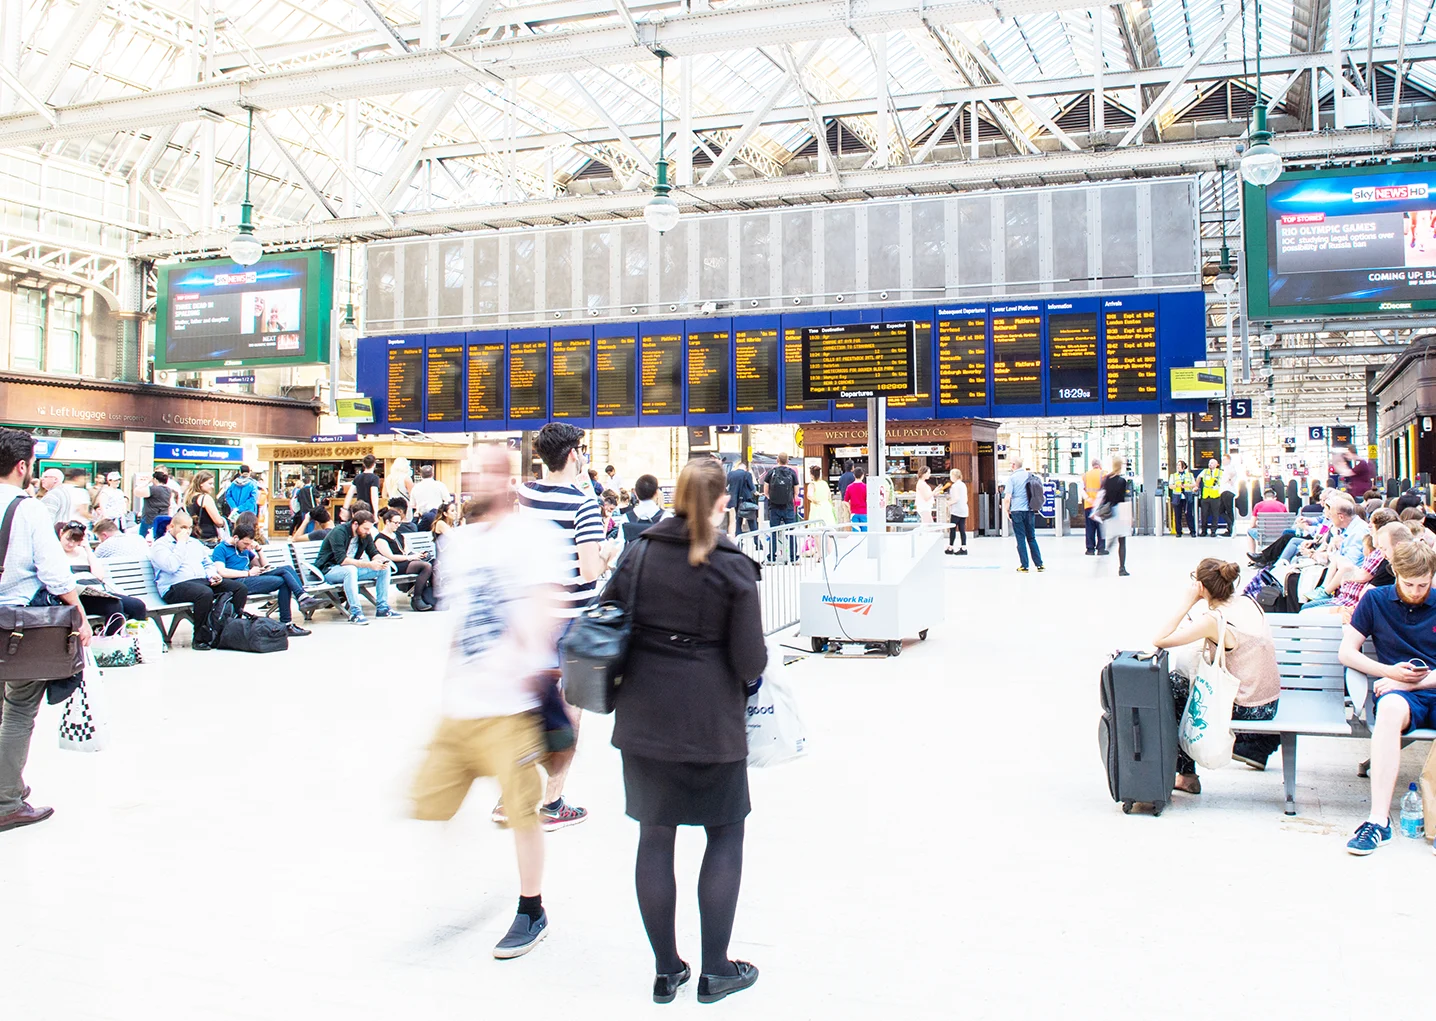 Passengers standing and sitting on a busy station concourse with departure boards visible in the background. 